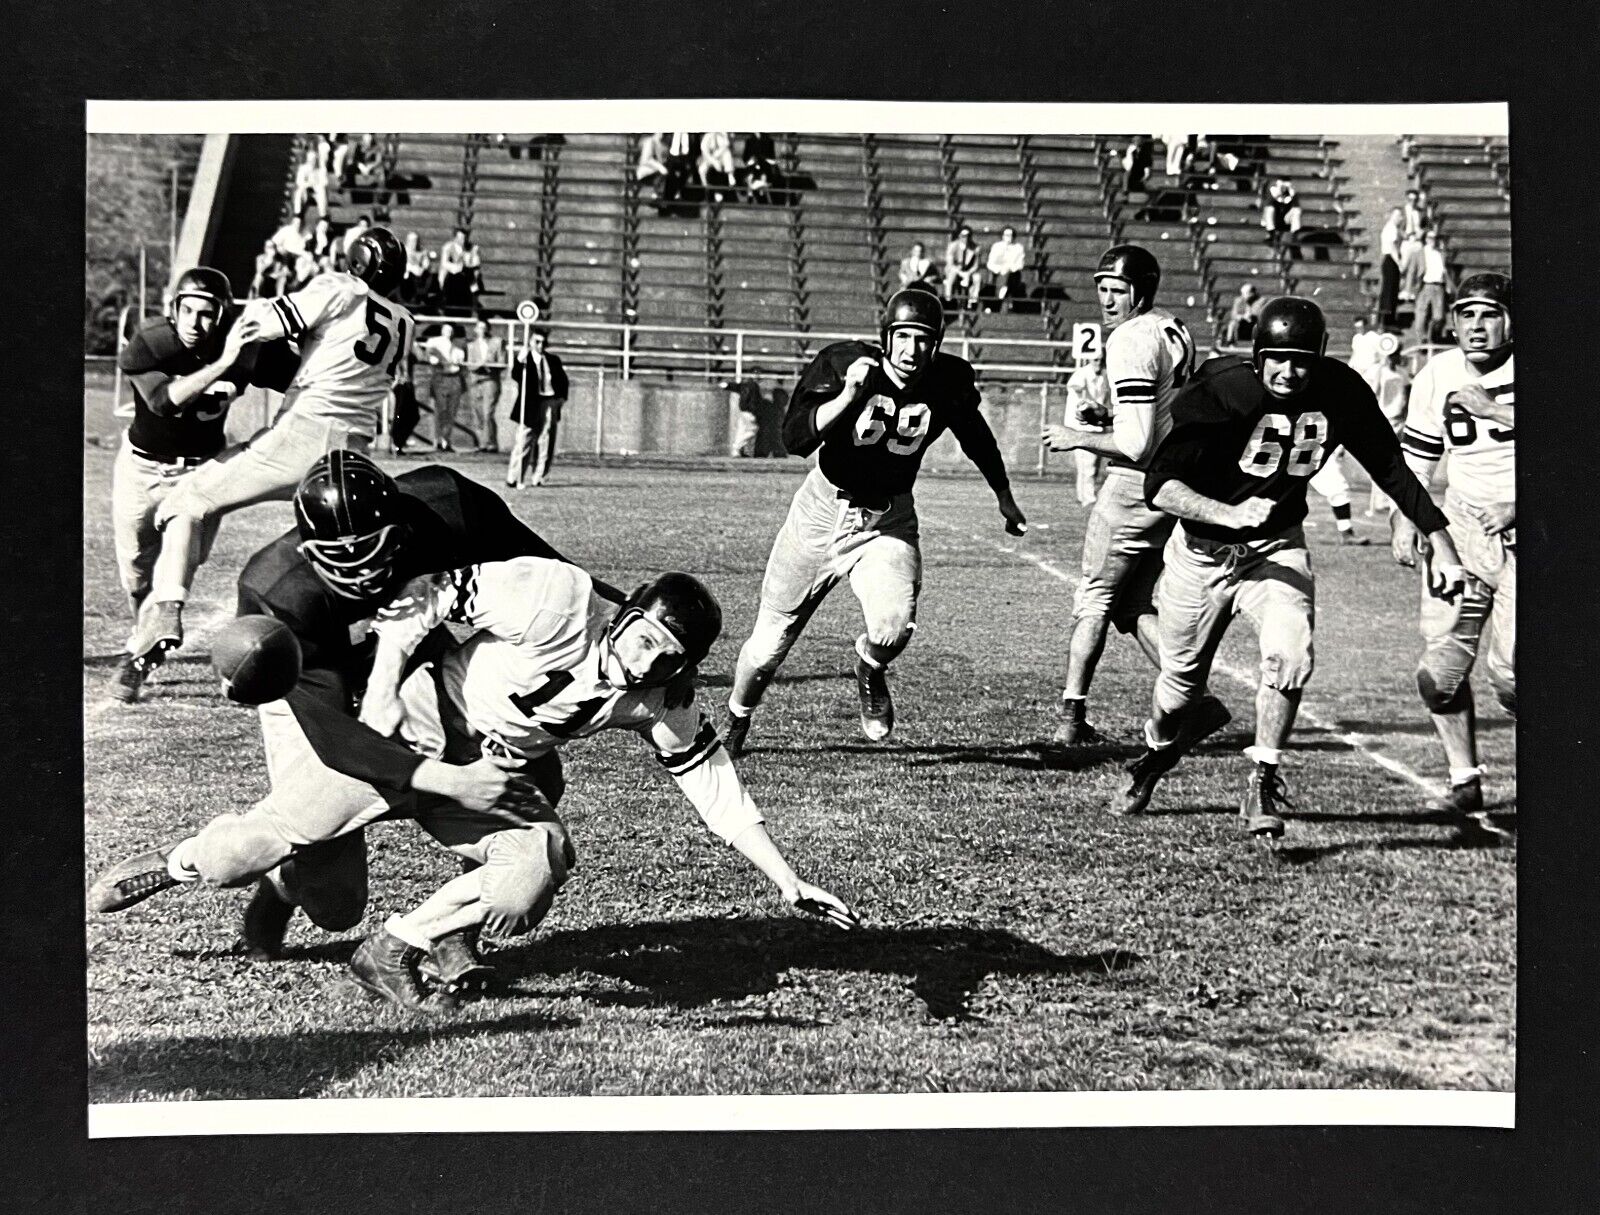 1950s High School Football Game Tackle Leather Helmets Vintage Press Photo